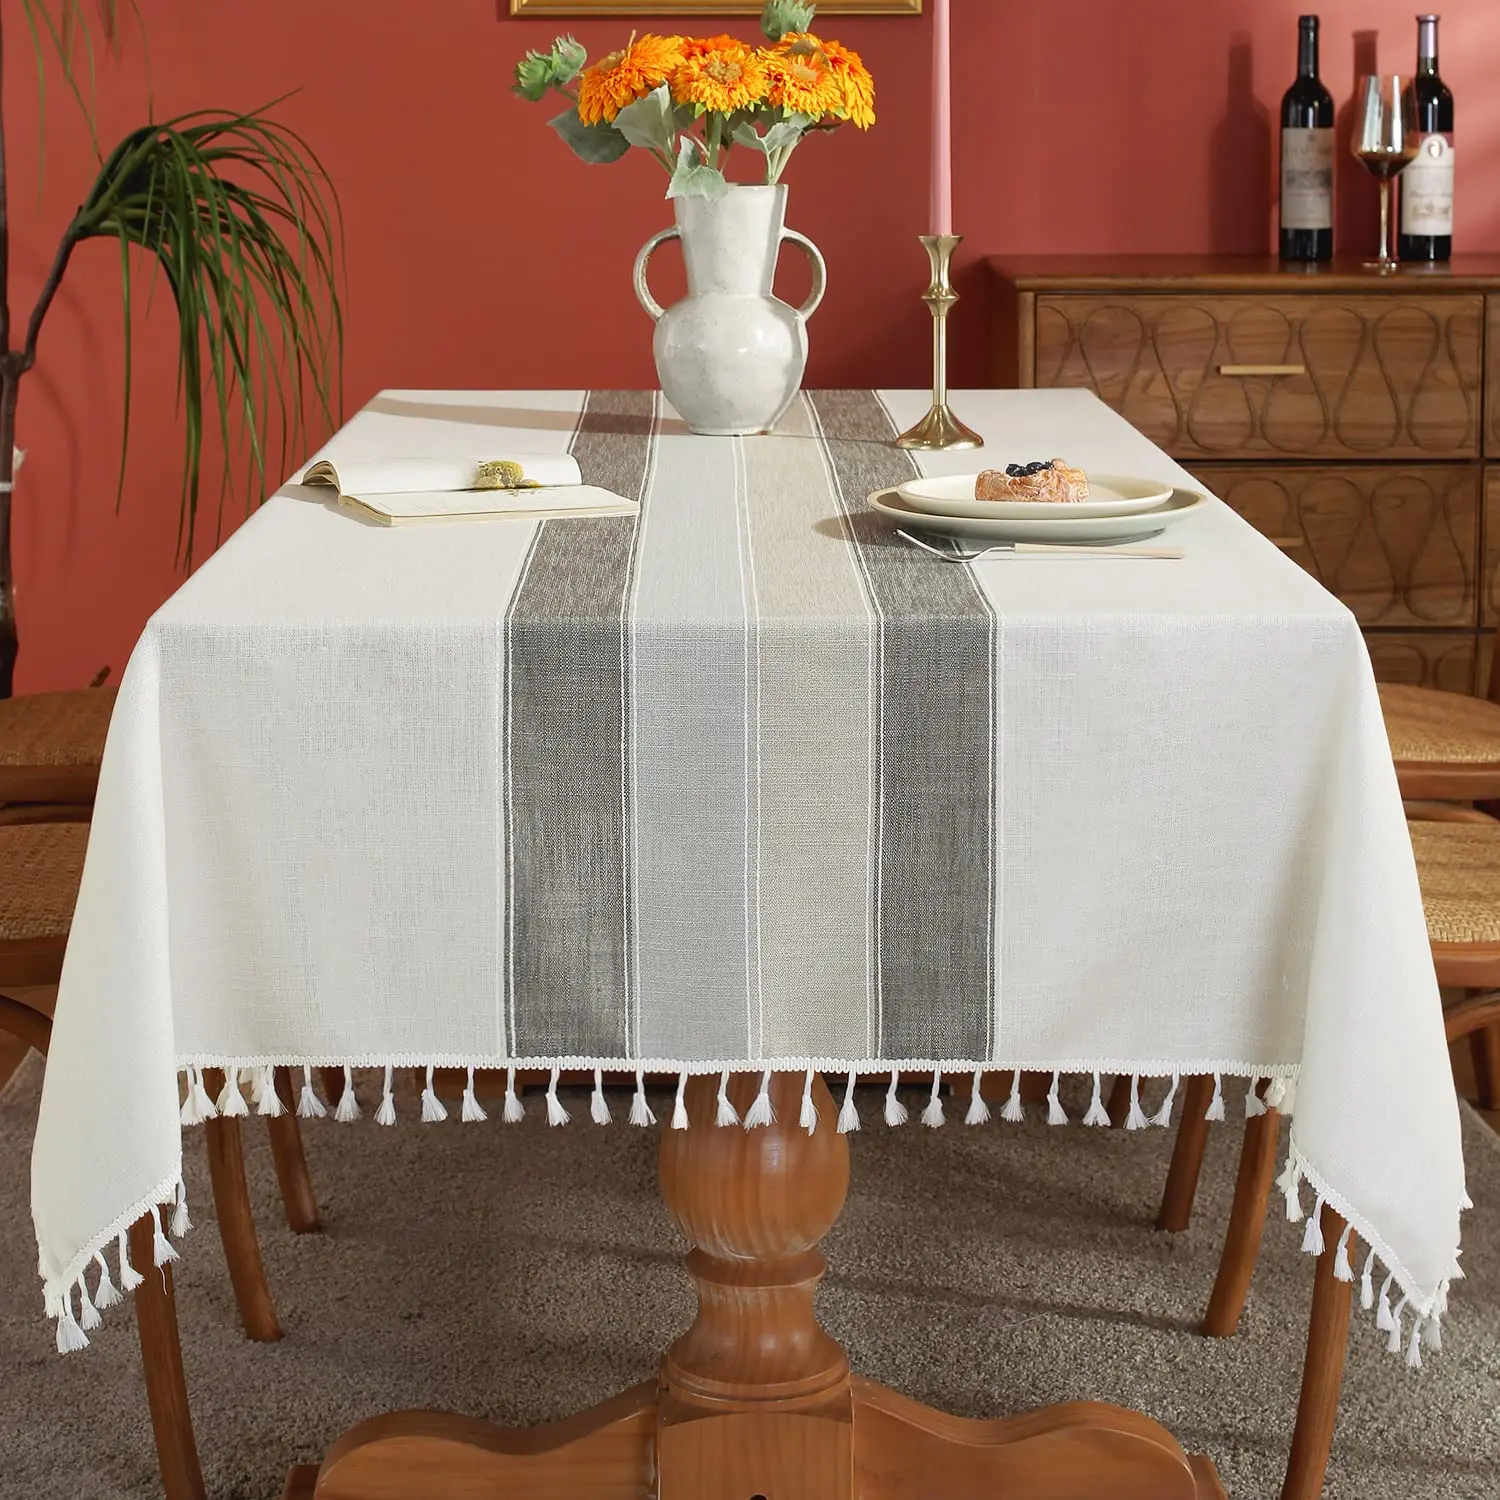 

Rustic Tablecloth Cotton Linen Waterproof Stripes Tablecloths Burlap Table Cloths for Kitchen Dining Table Cloth for Rectangle